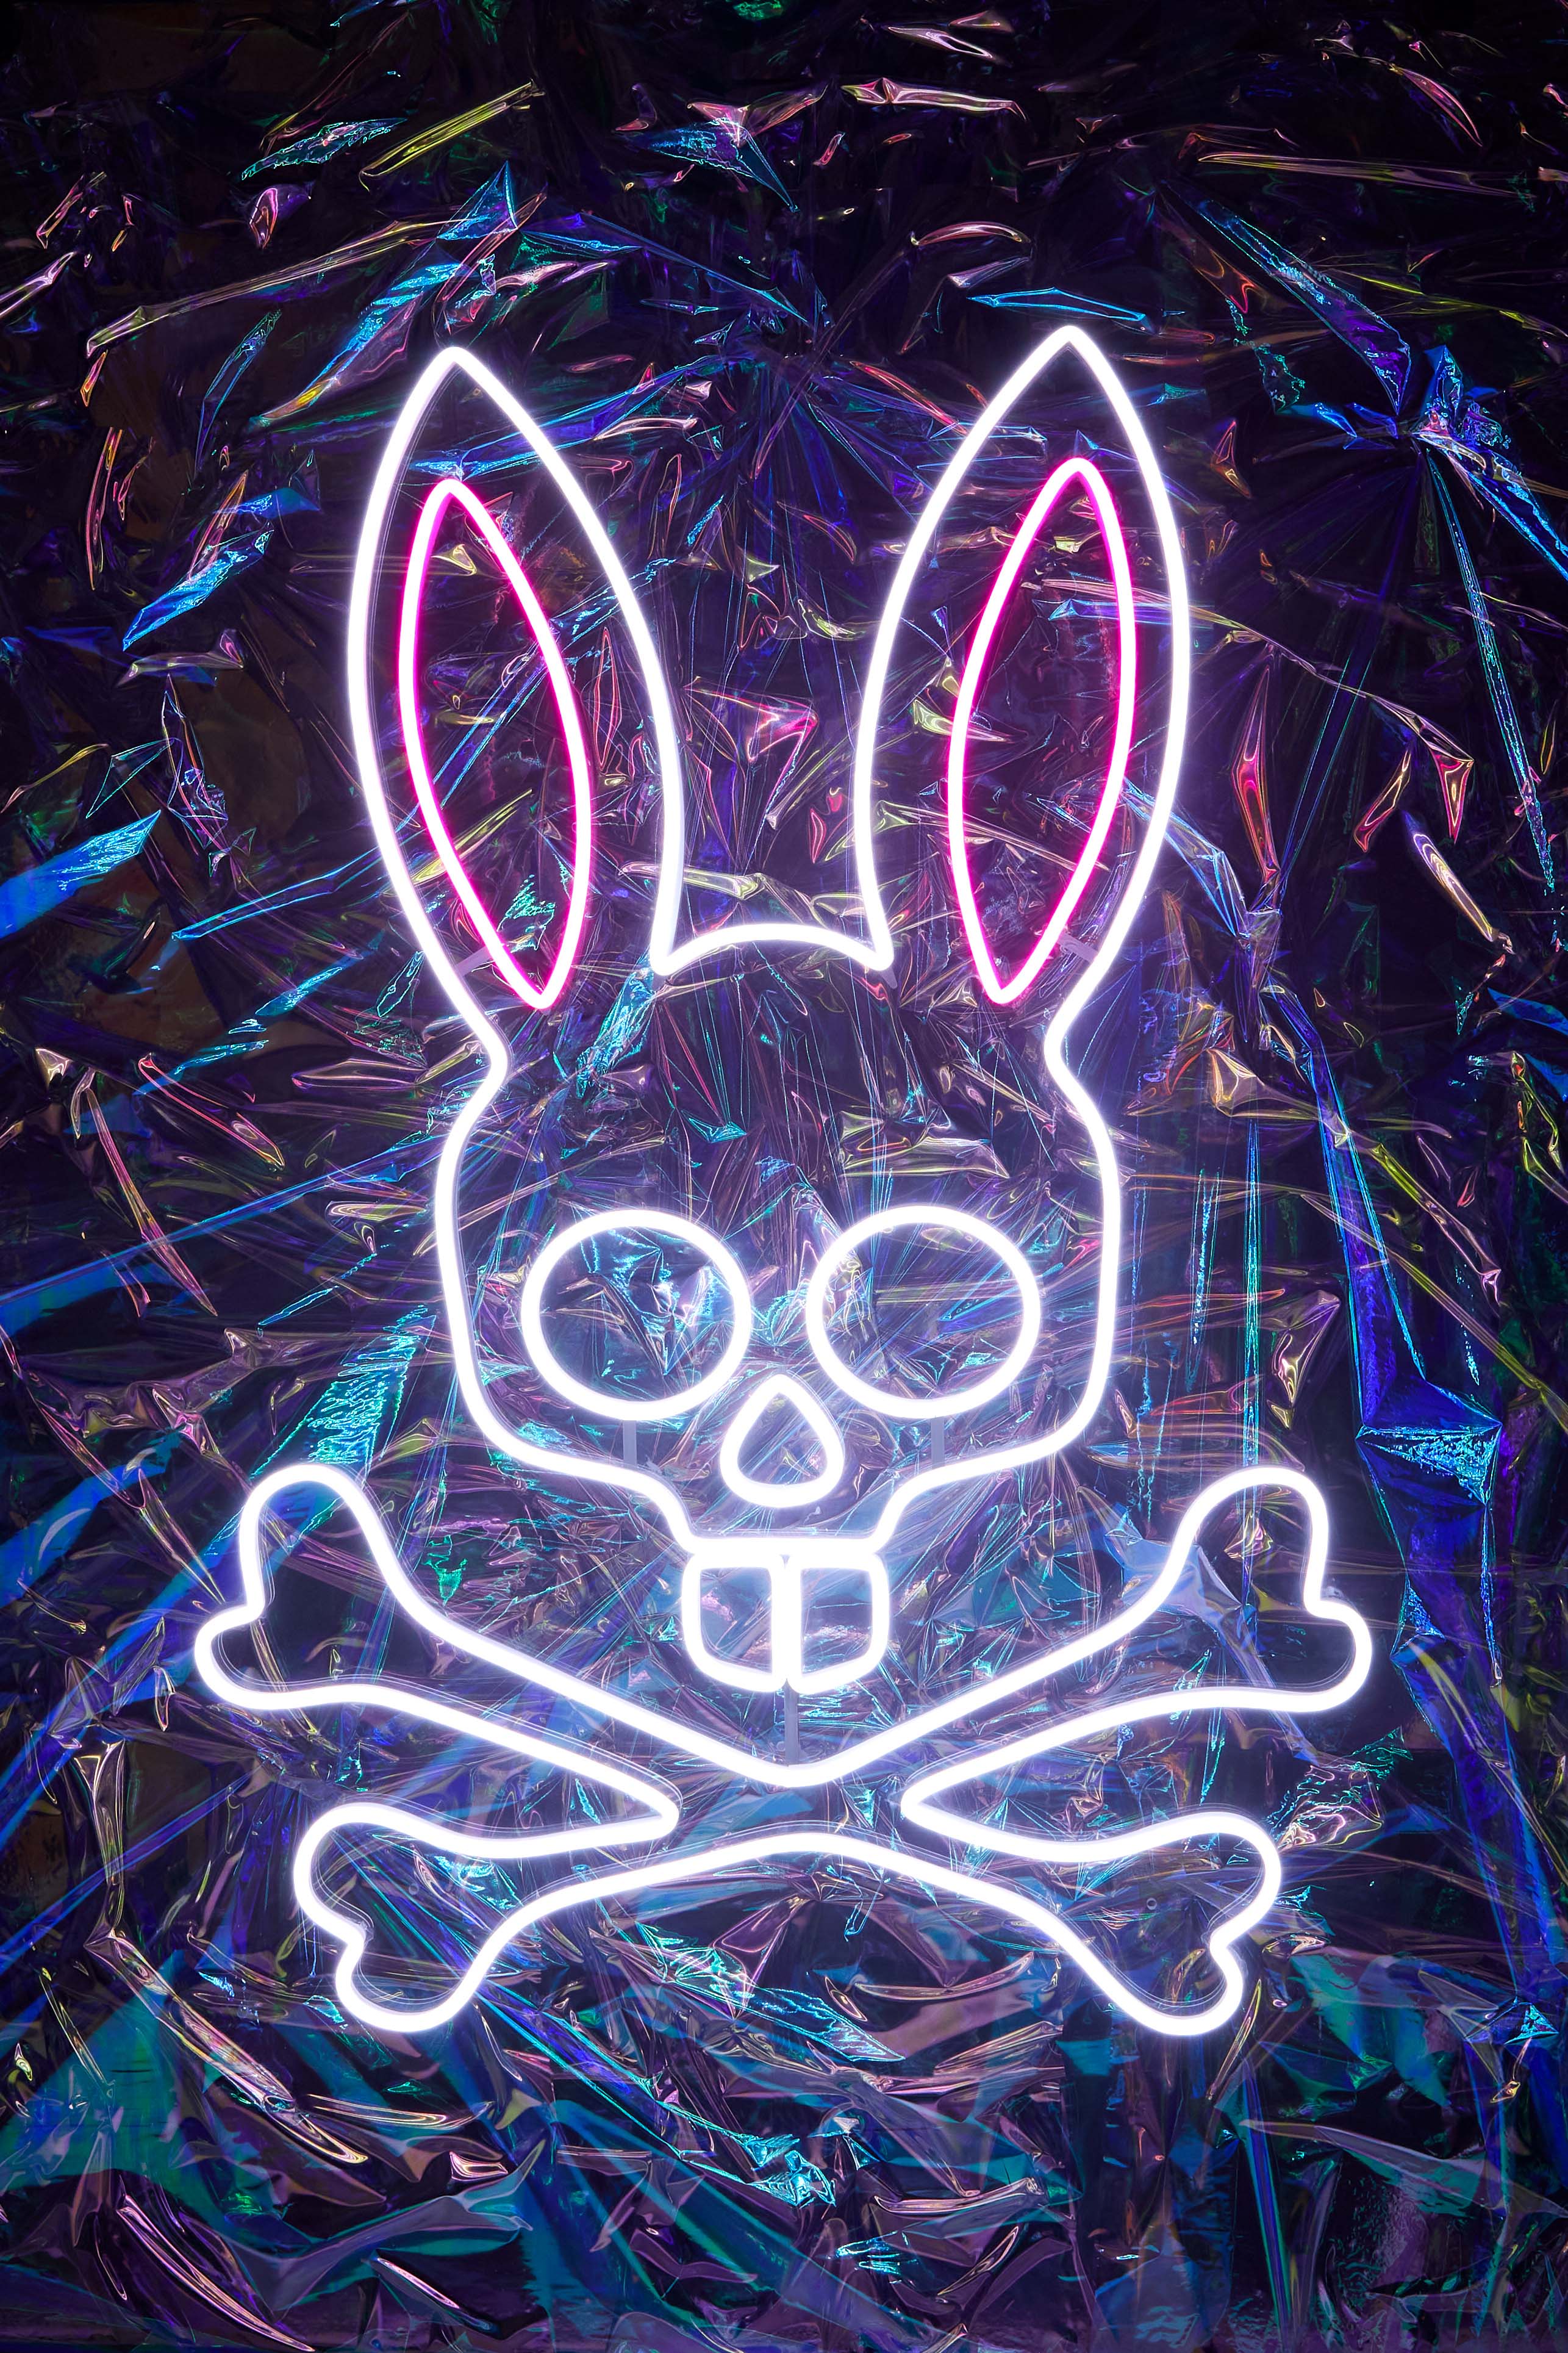 Psycho Bunny behalf of the Psycho Bunny family we'd like to wish you a Happy New Year! We're leaving behind a pretty crazy & unexpected year, but we know